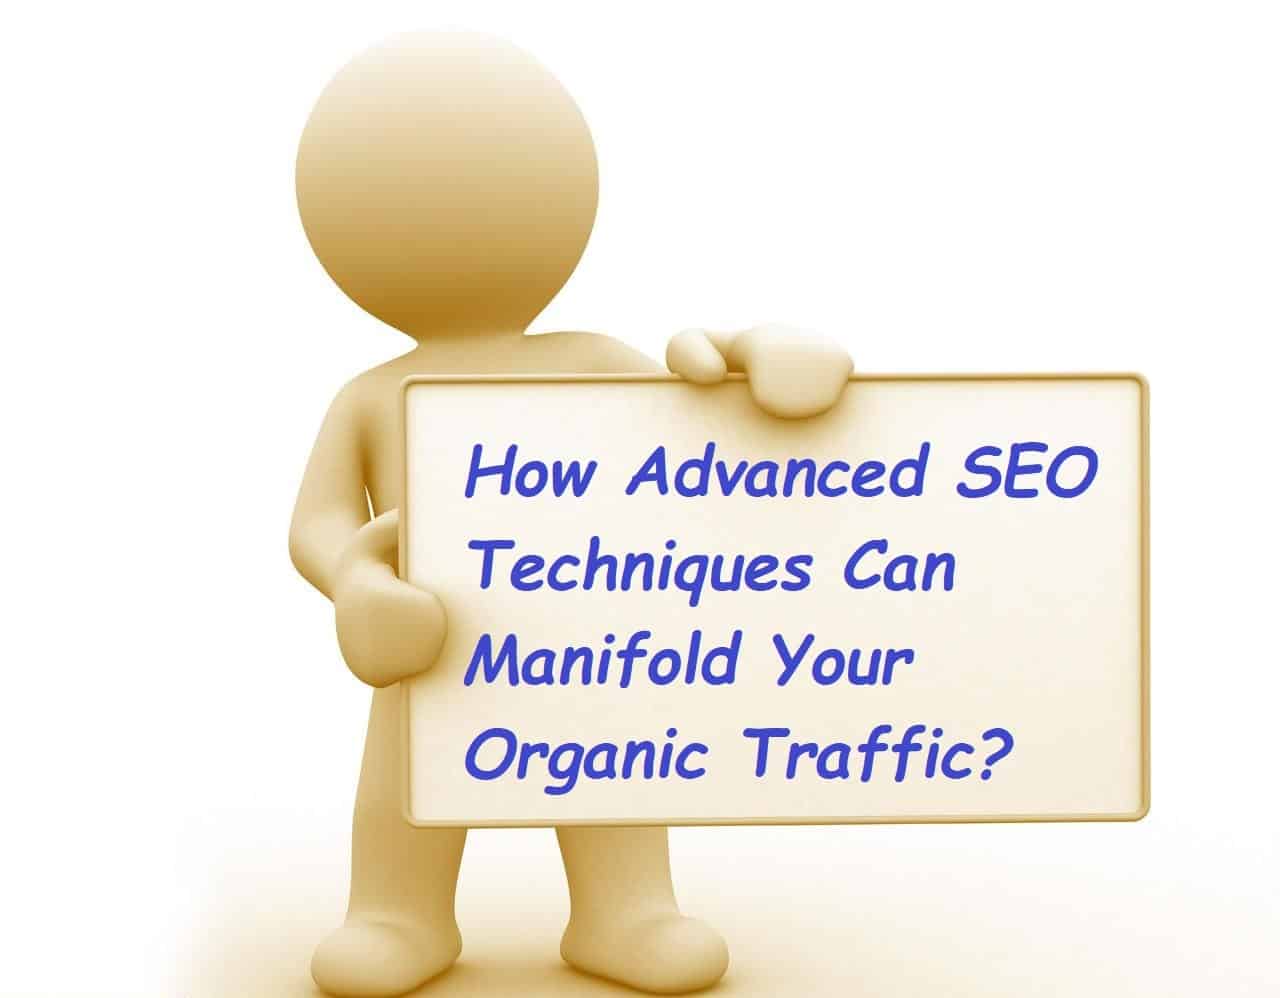 SEO Techniques Can Manifold Your Organic Traffic